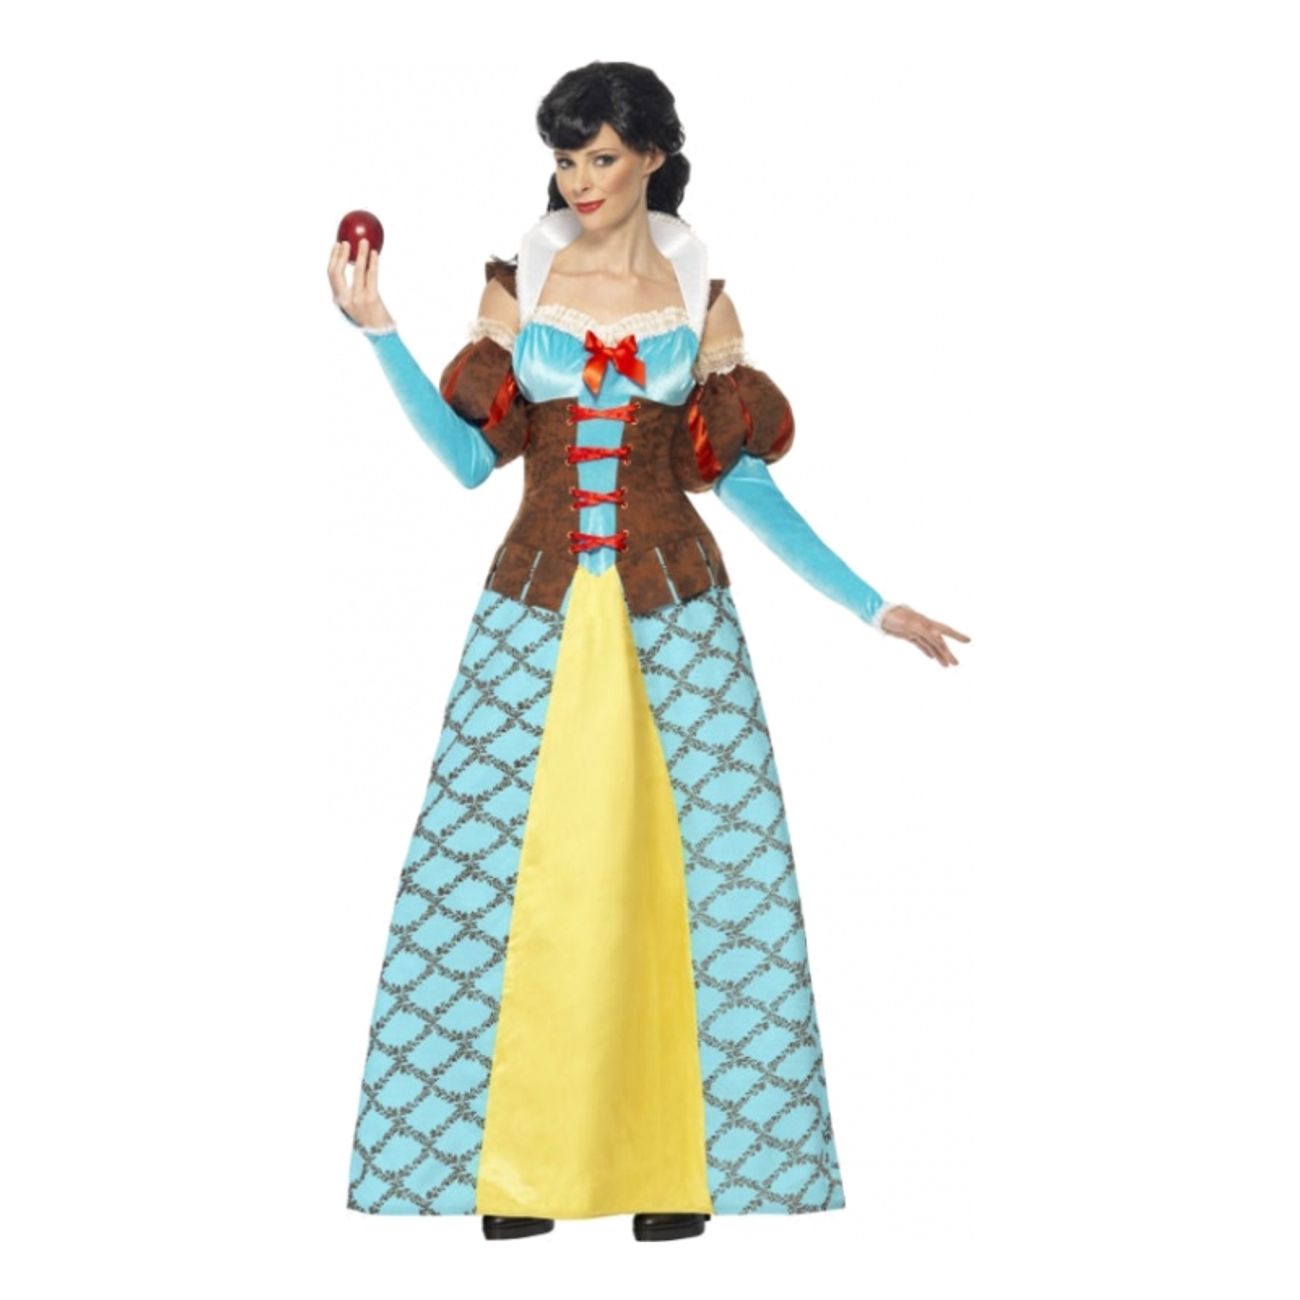 storybook-snow-white-costume-small-1